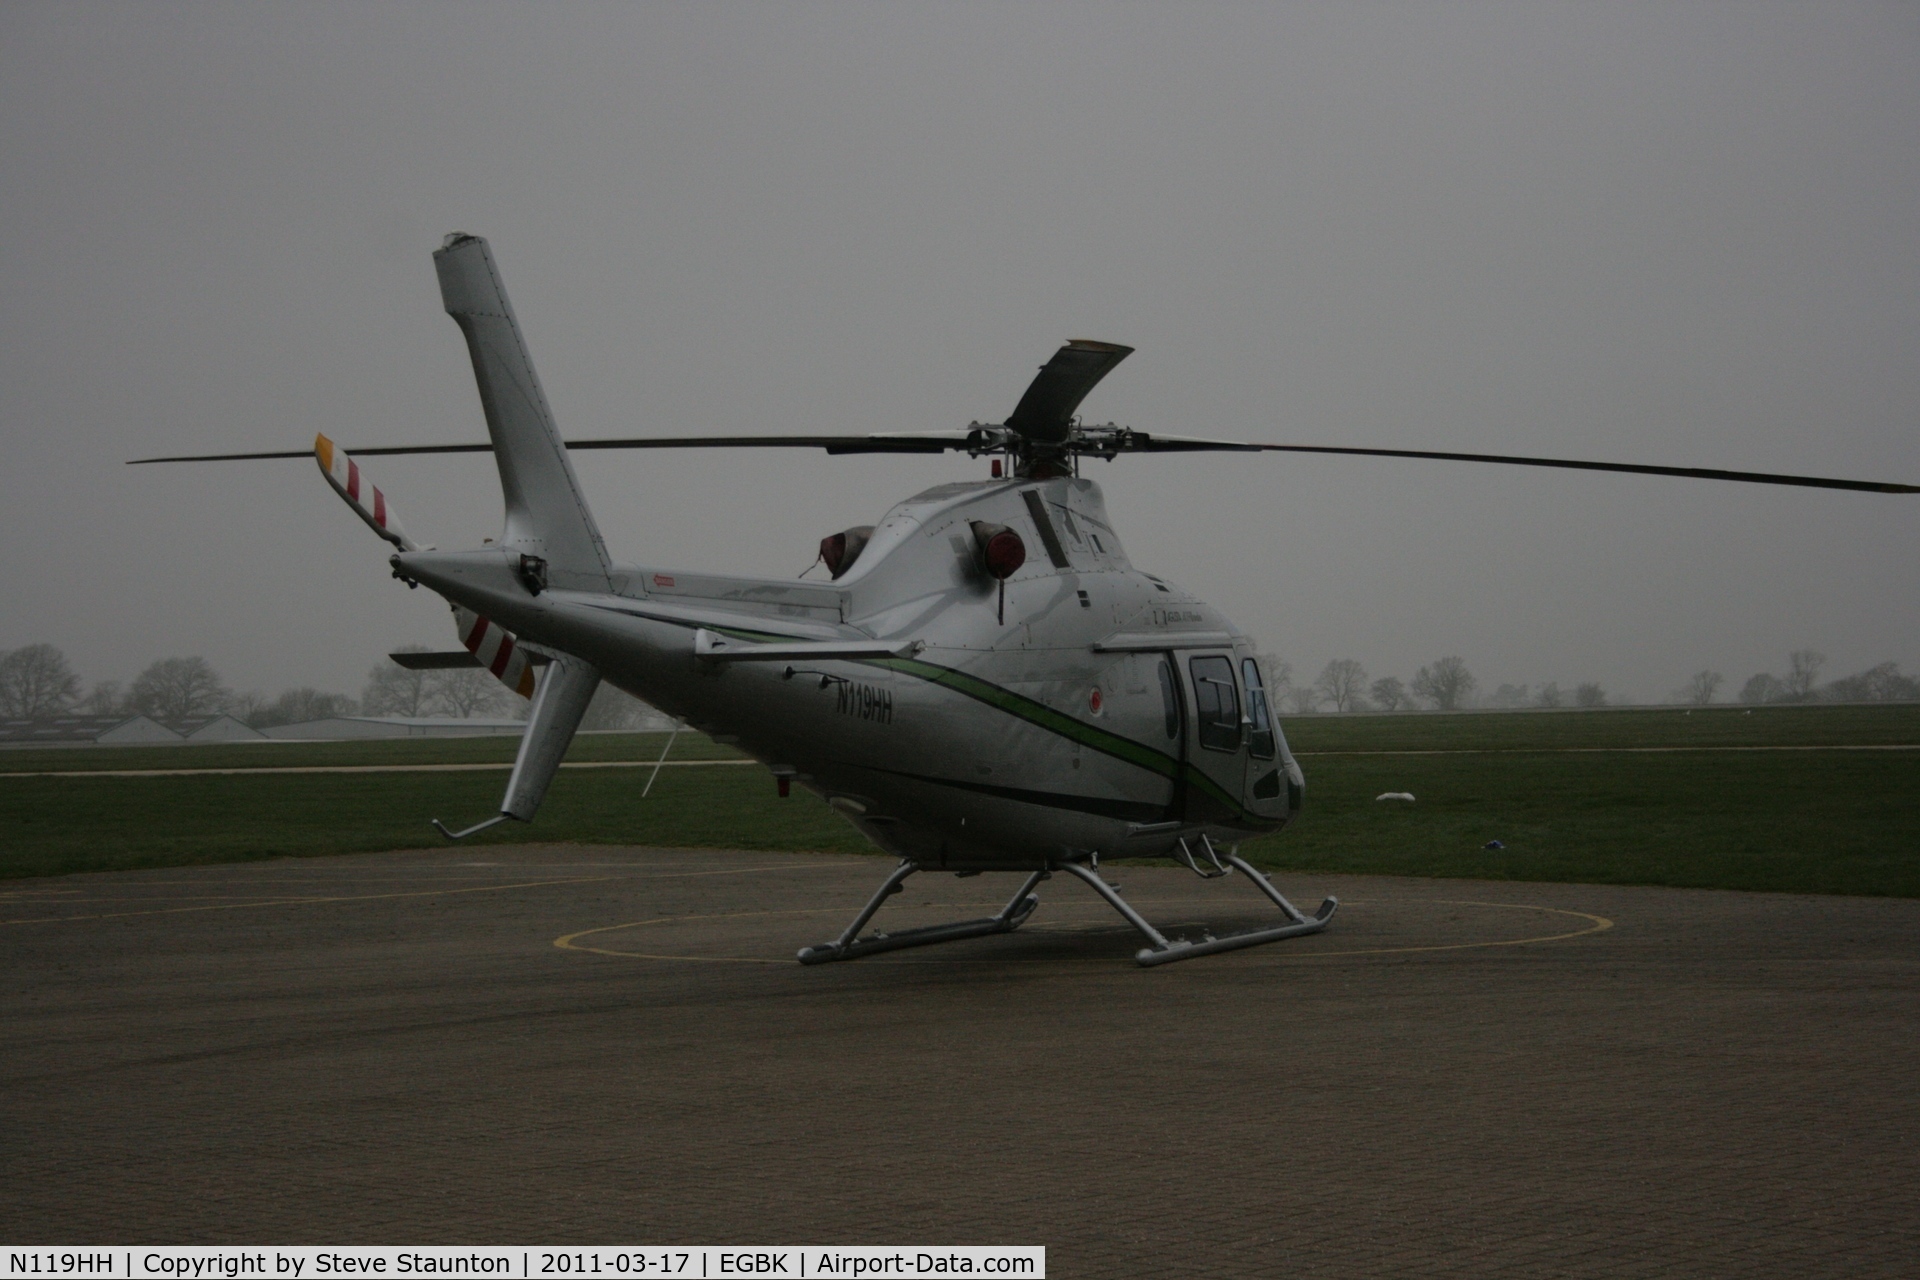 N119HH, 2000 Agusta A-119 C/N 14008, Taken at Sywell Airfield March 2011